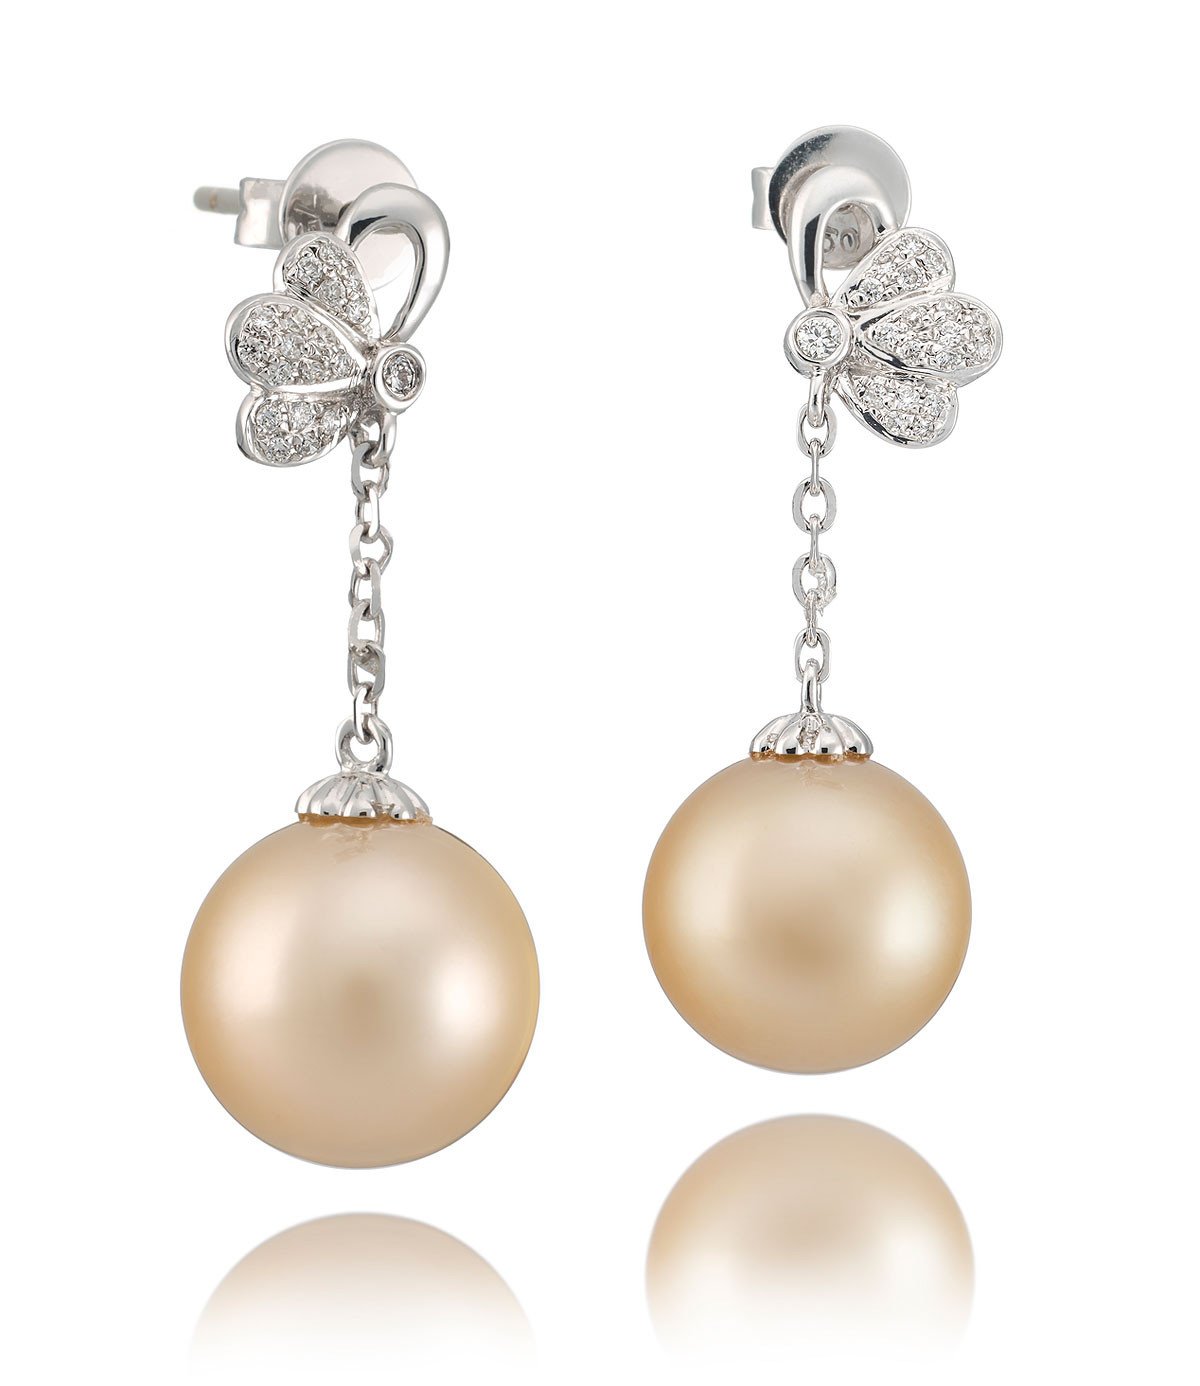 Odyssey South Sea Pearl Earrings with Diamonds in 18k White Gold